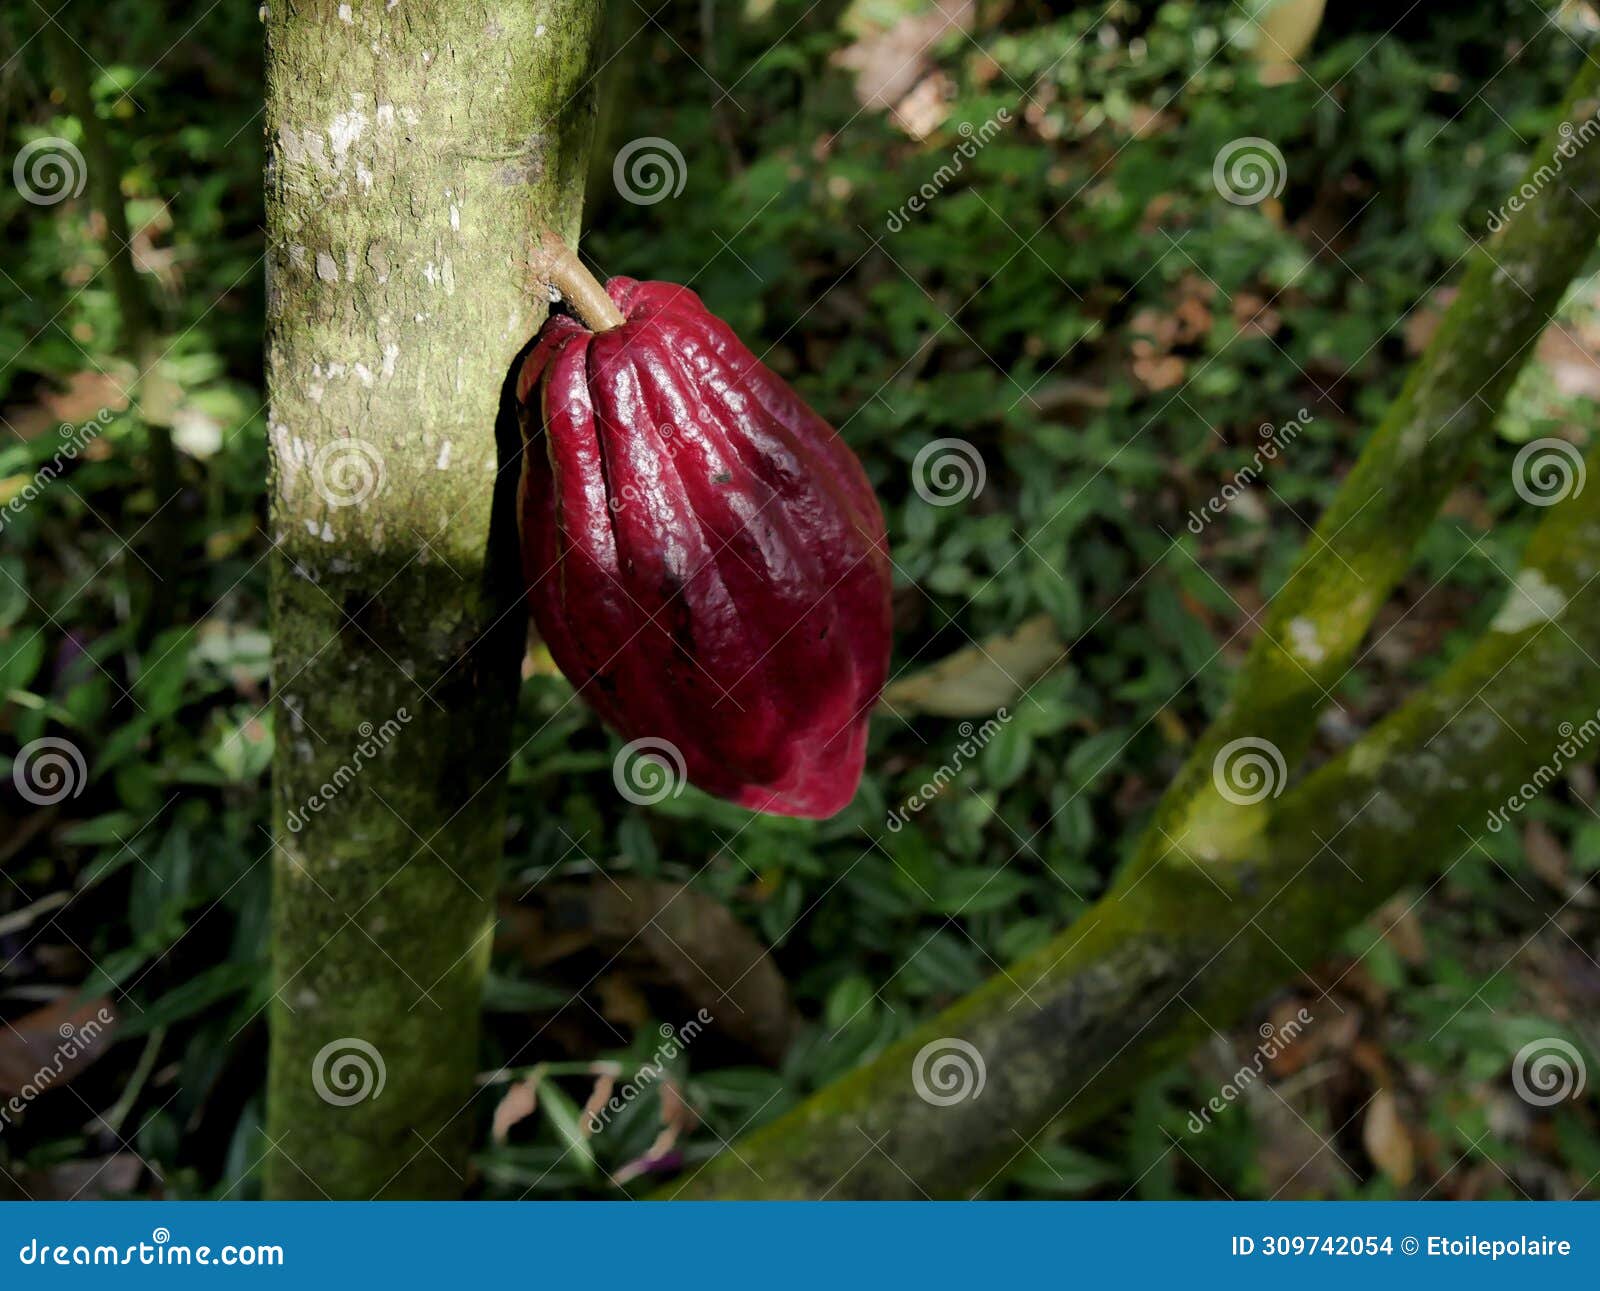  red criollo cacao pod growing on theobroma cacao tree